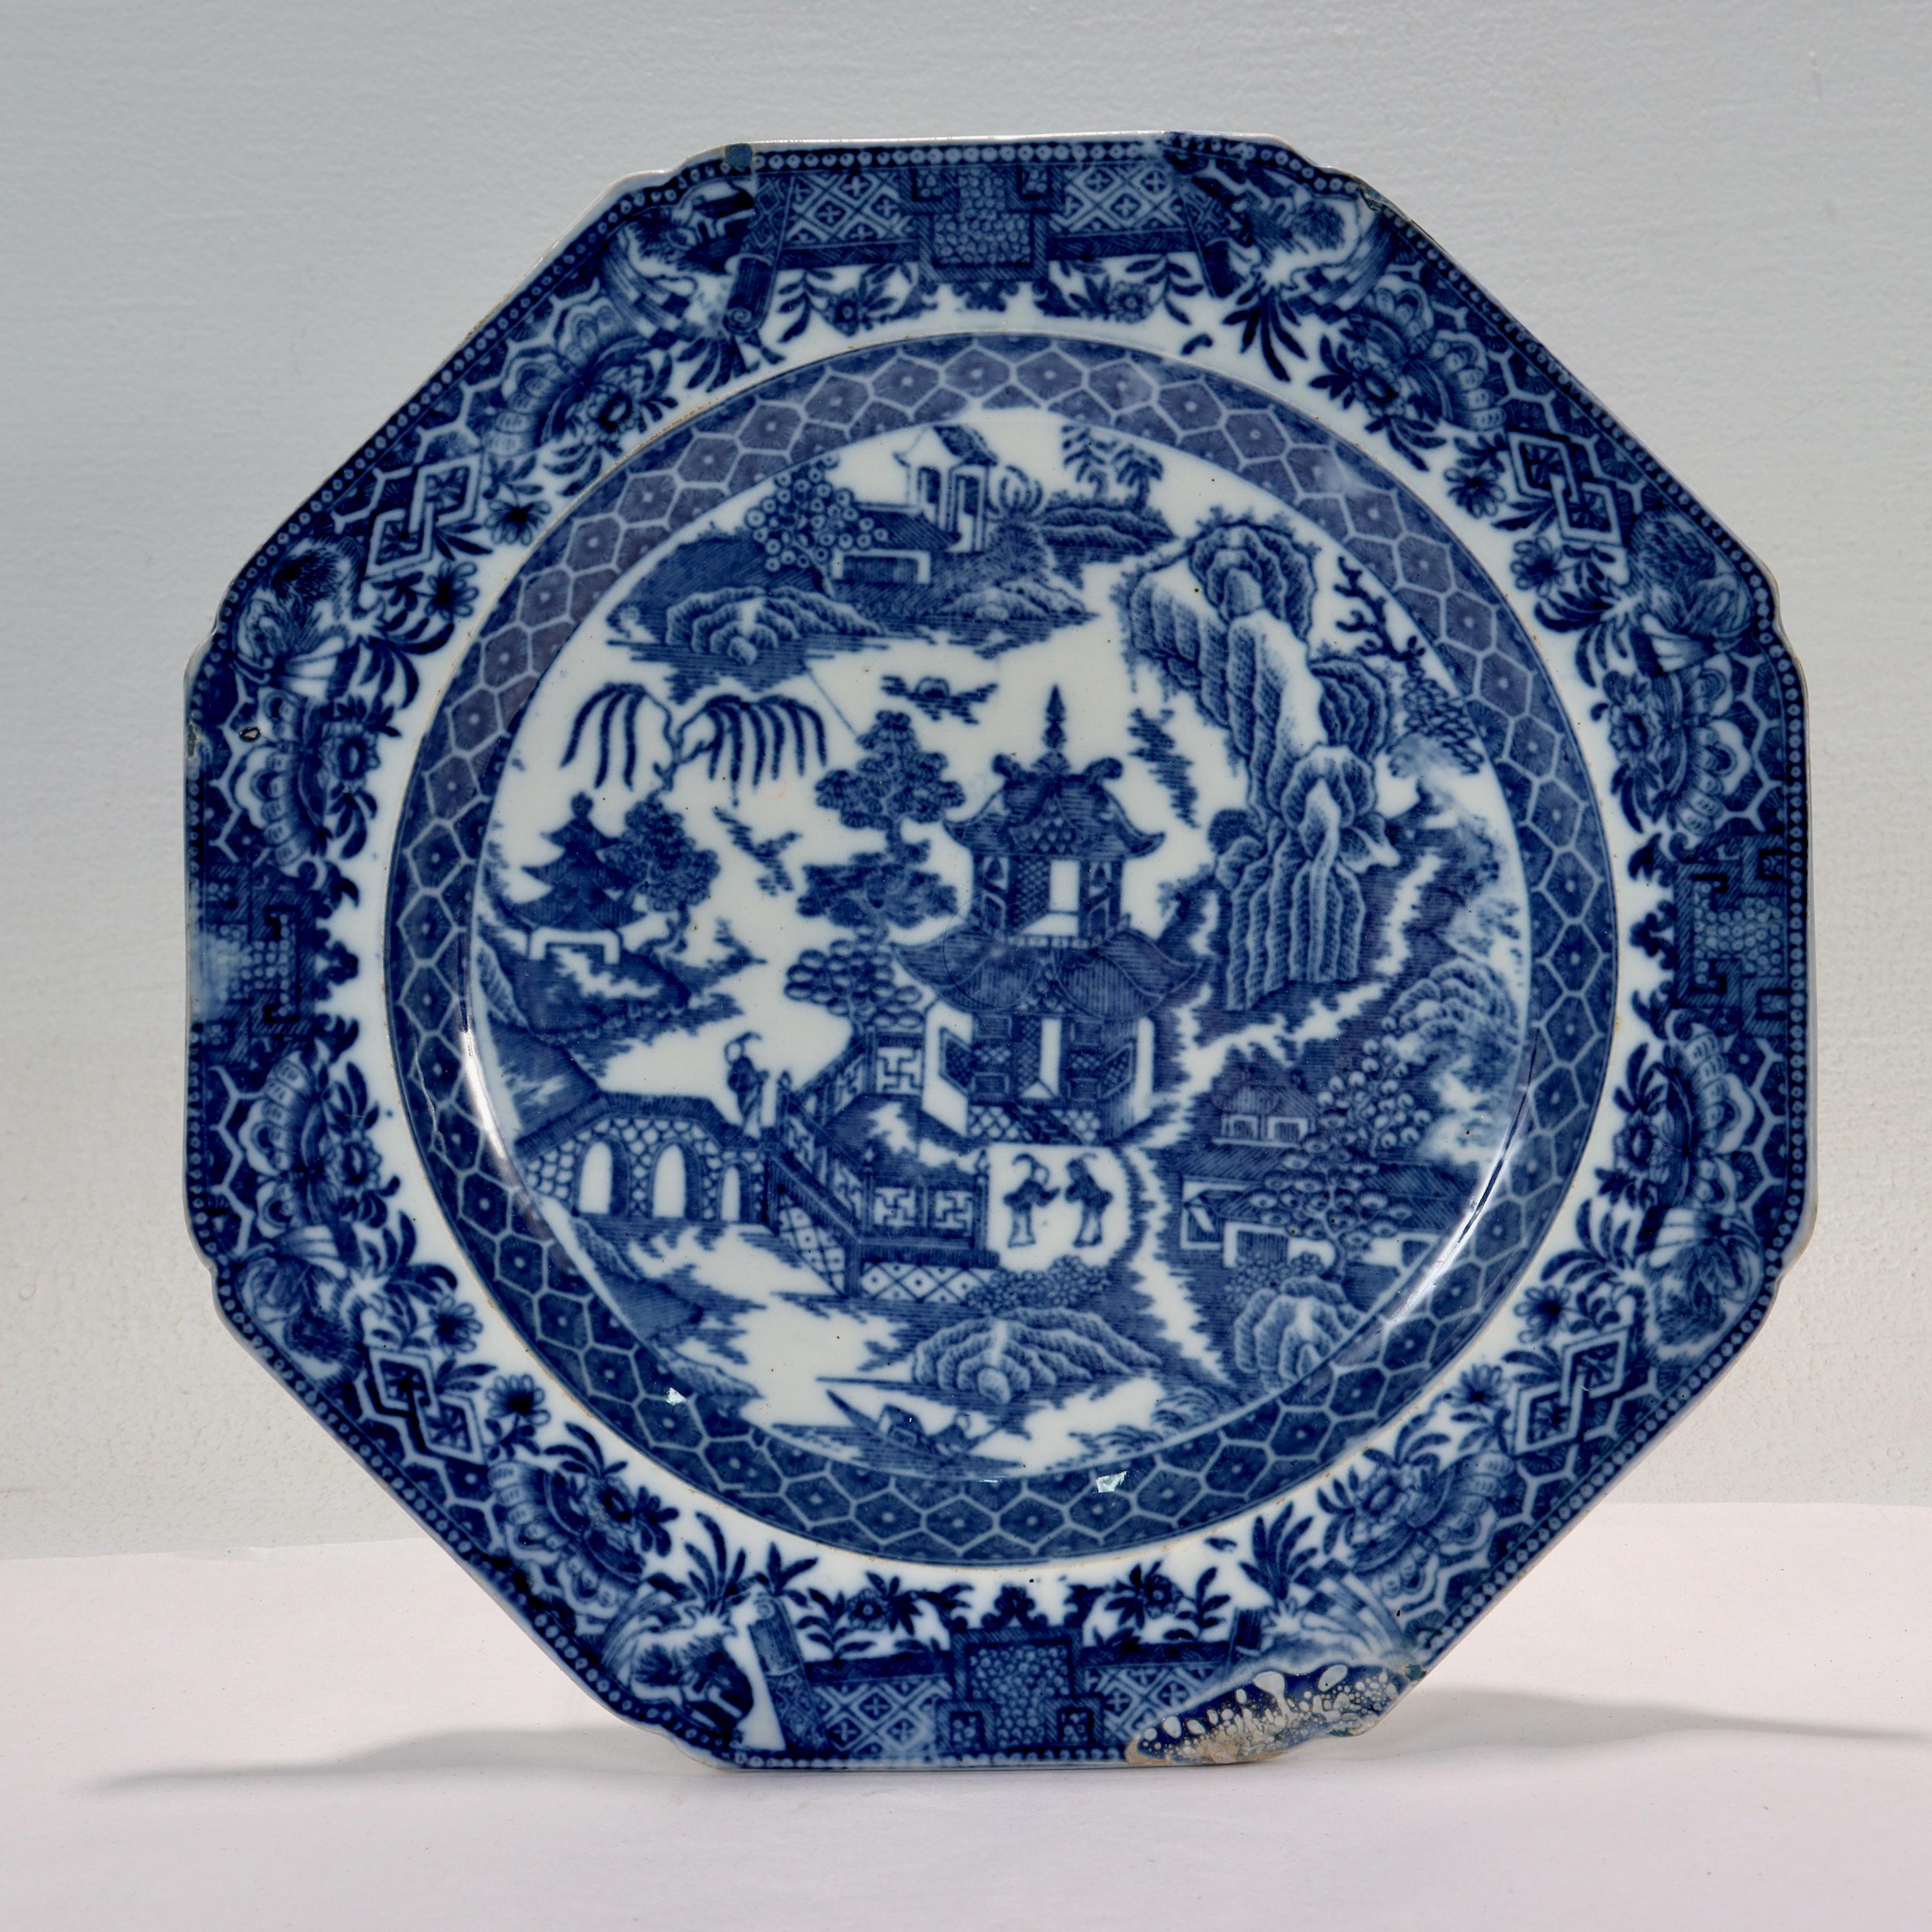 A fine antique English soft paste porcelain or creamware plate.

With a blue willow underglaze blue transfer decoration. 

Attributed to Longport. 

Marked to the reverse with a blue underglaze flower mark.

Simply a wonderful piece of early English